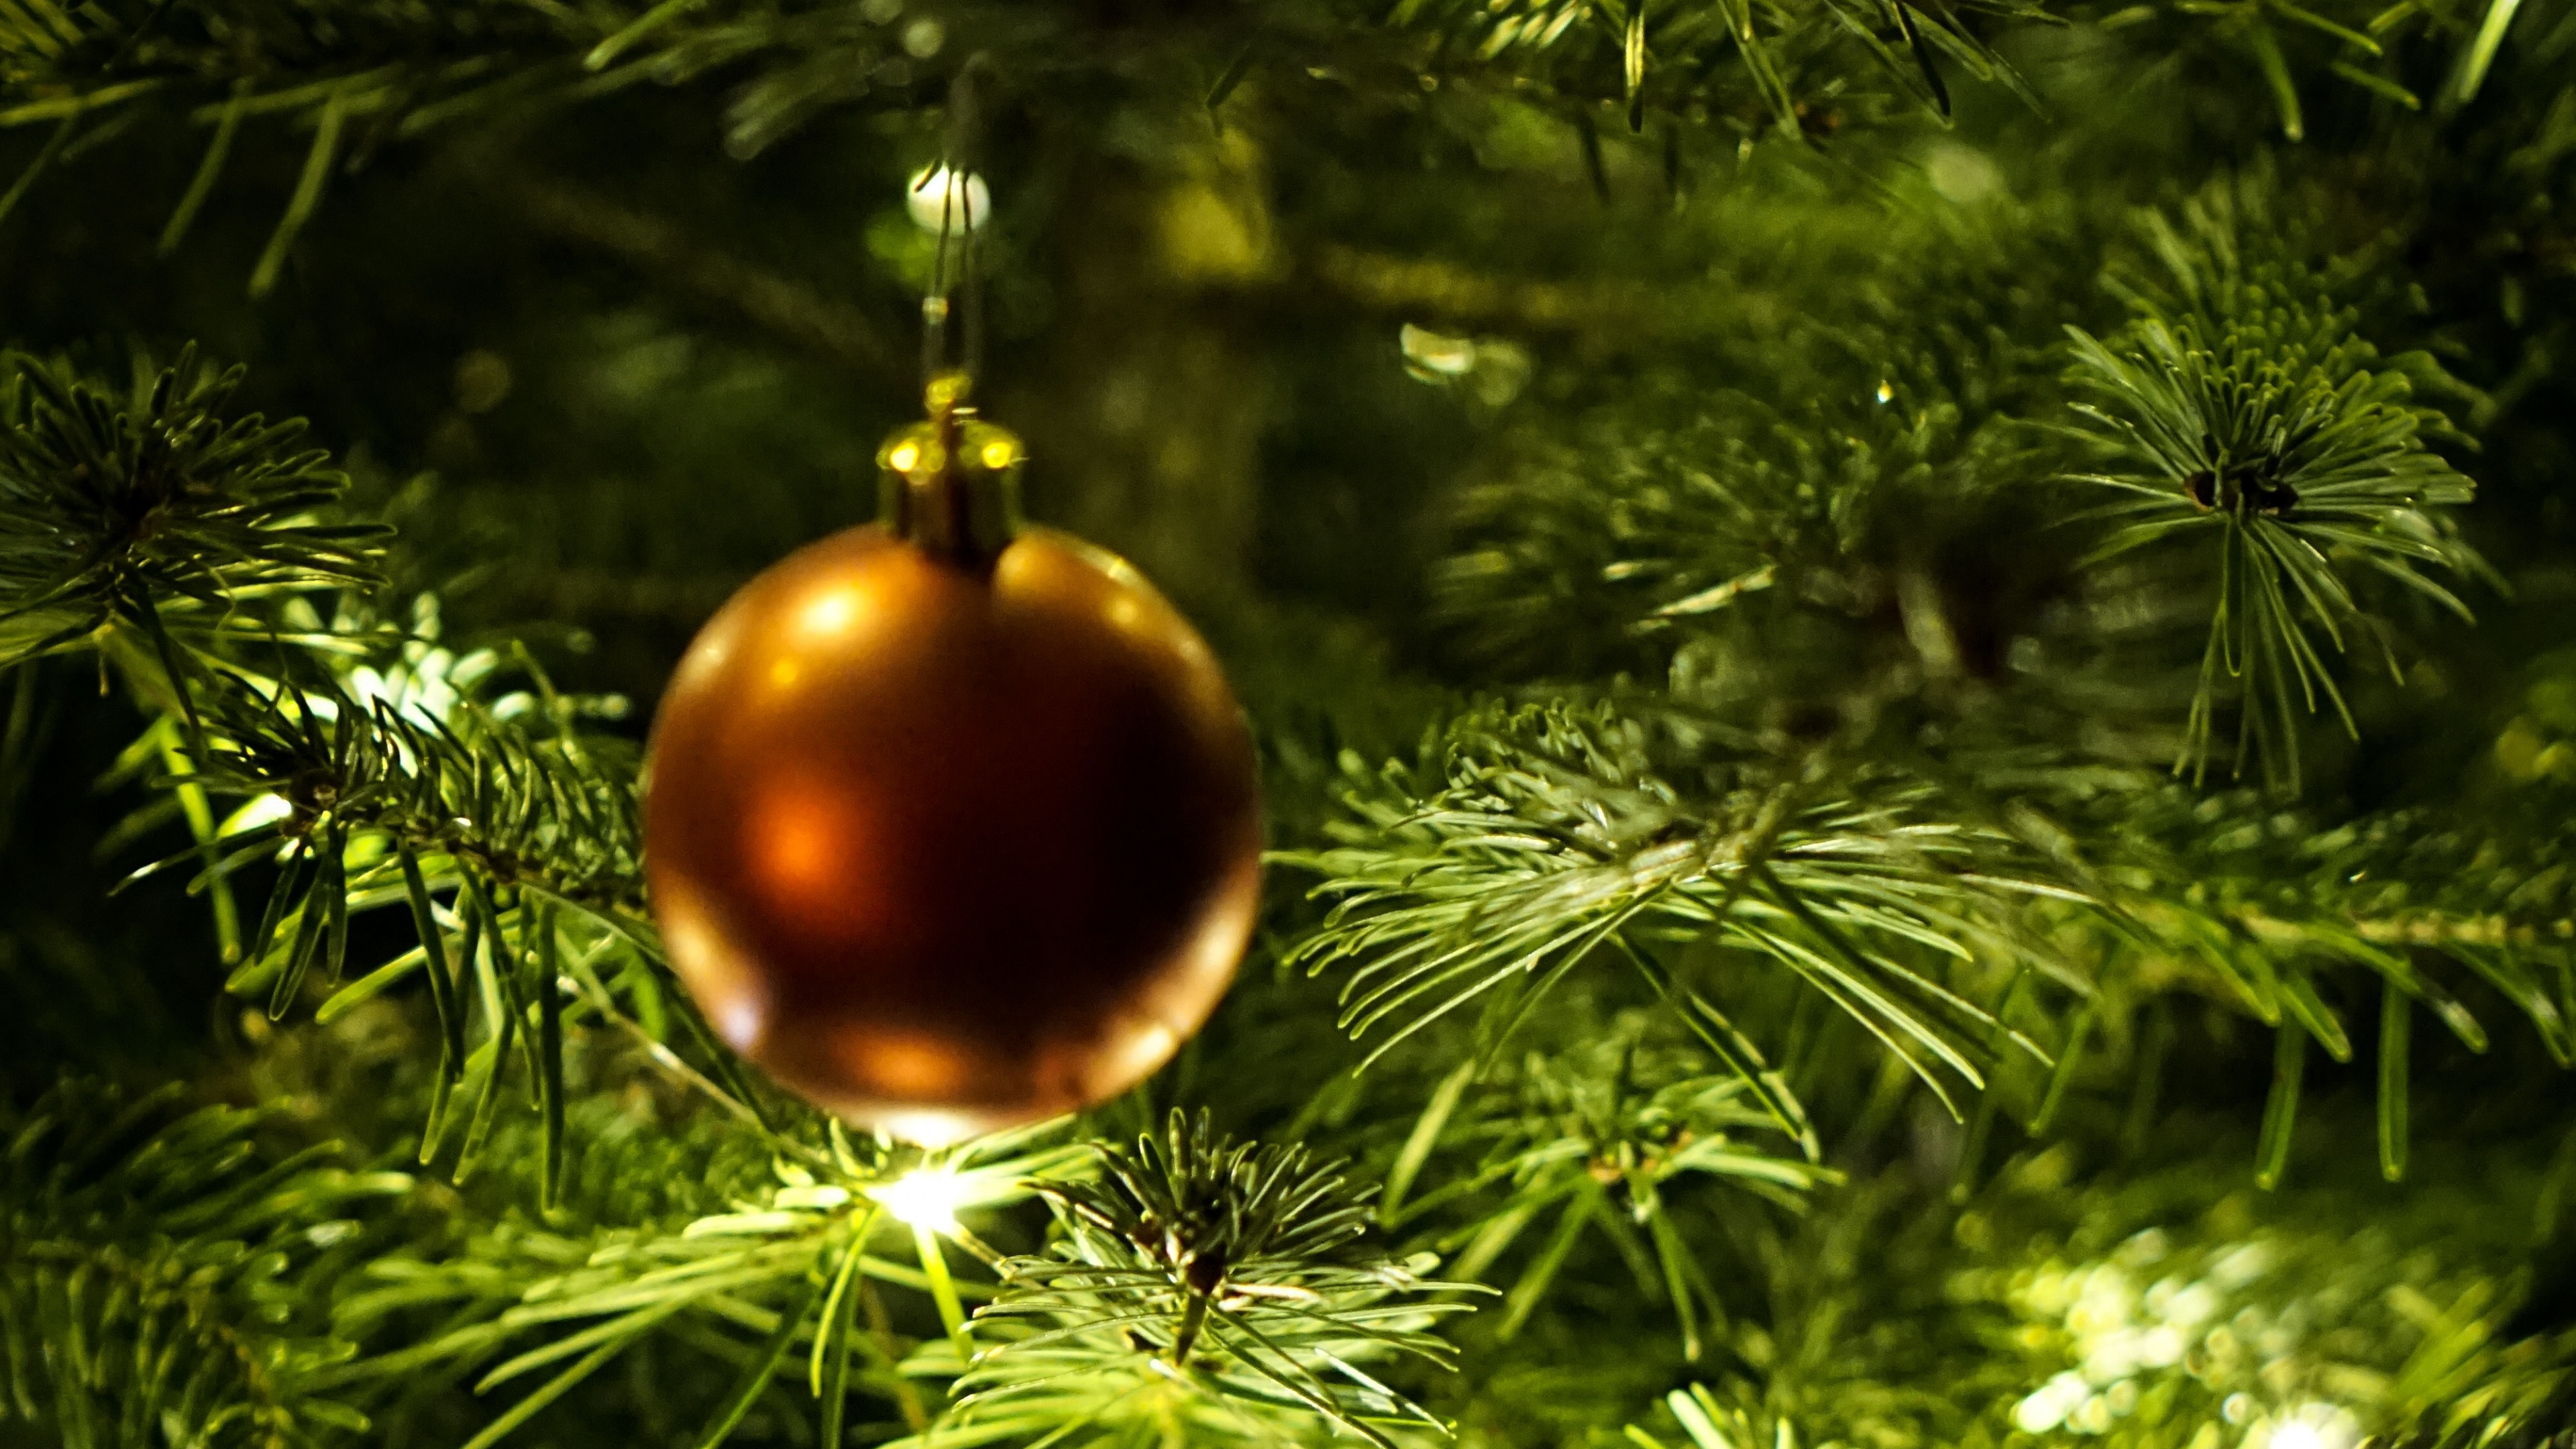 New Year, Christmas Day, Christmas Ornament, Christmas Decoration, Christmas Tree. Wallpaper in 3840x2160 Resolution